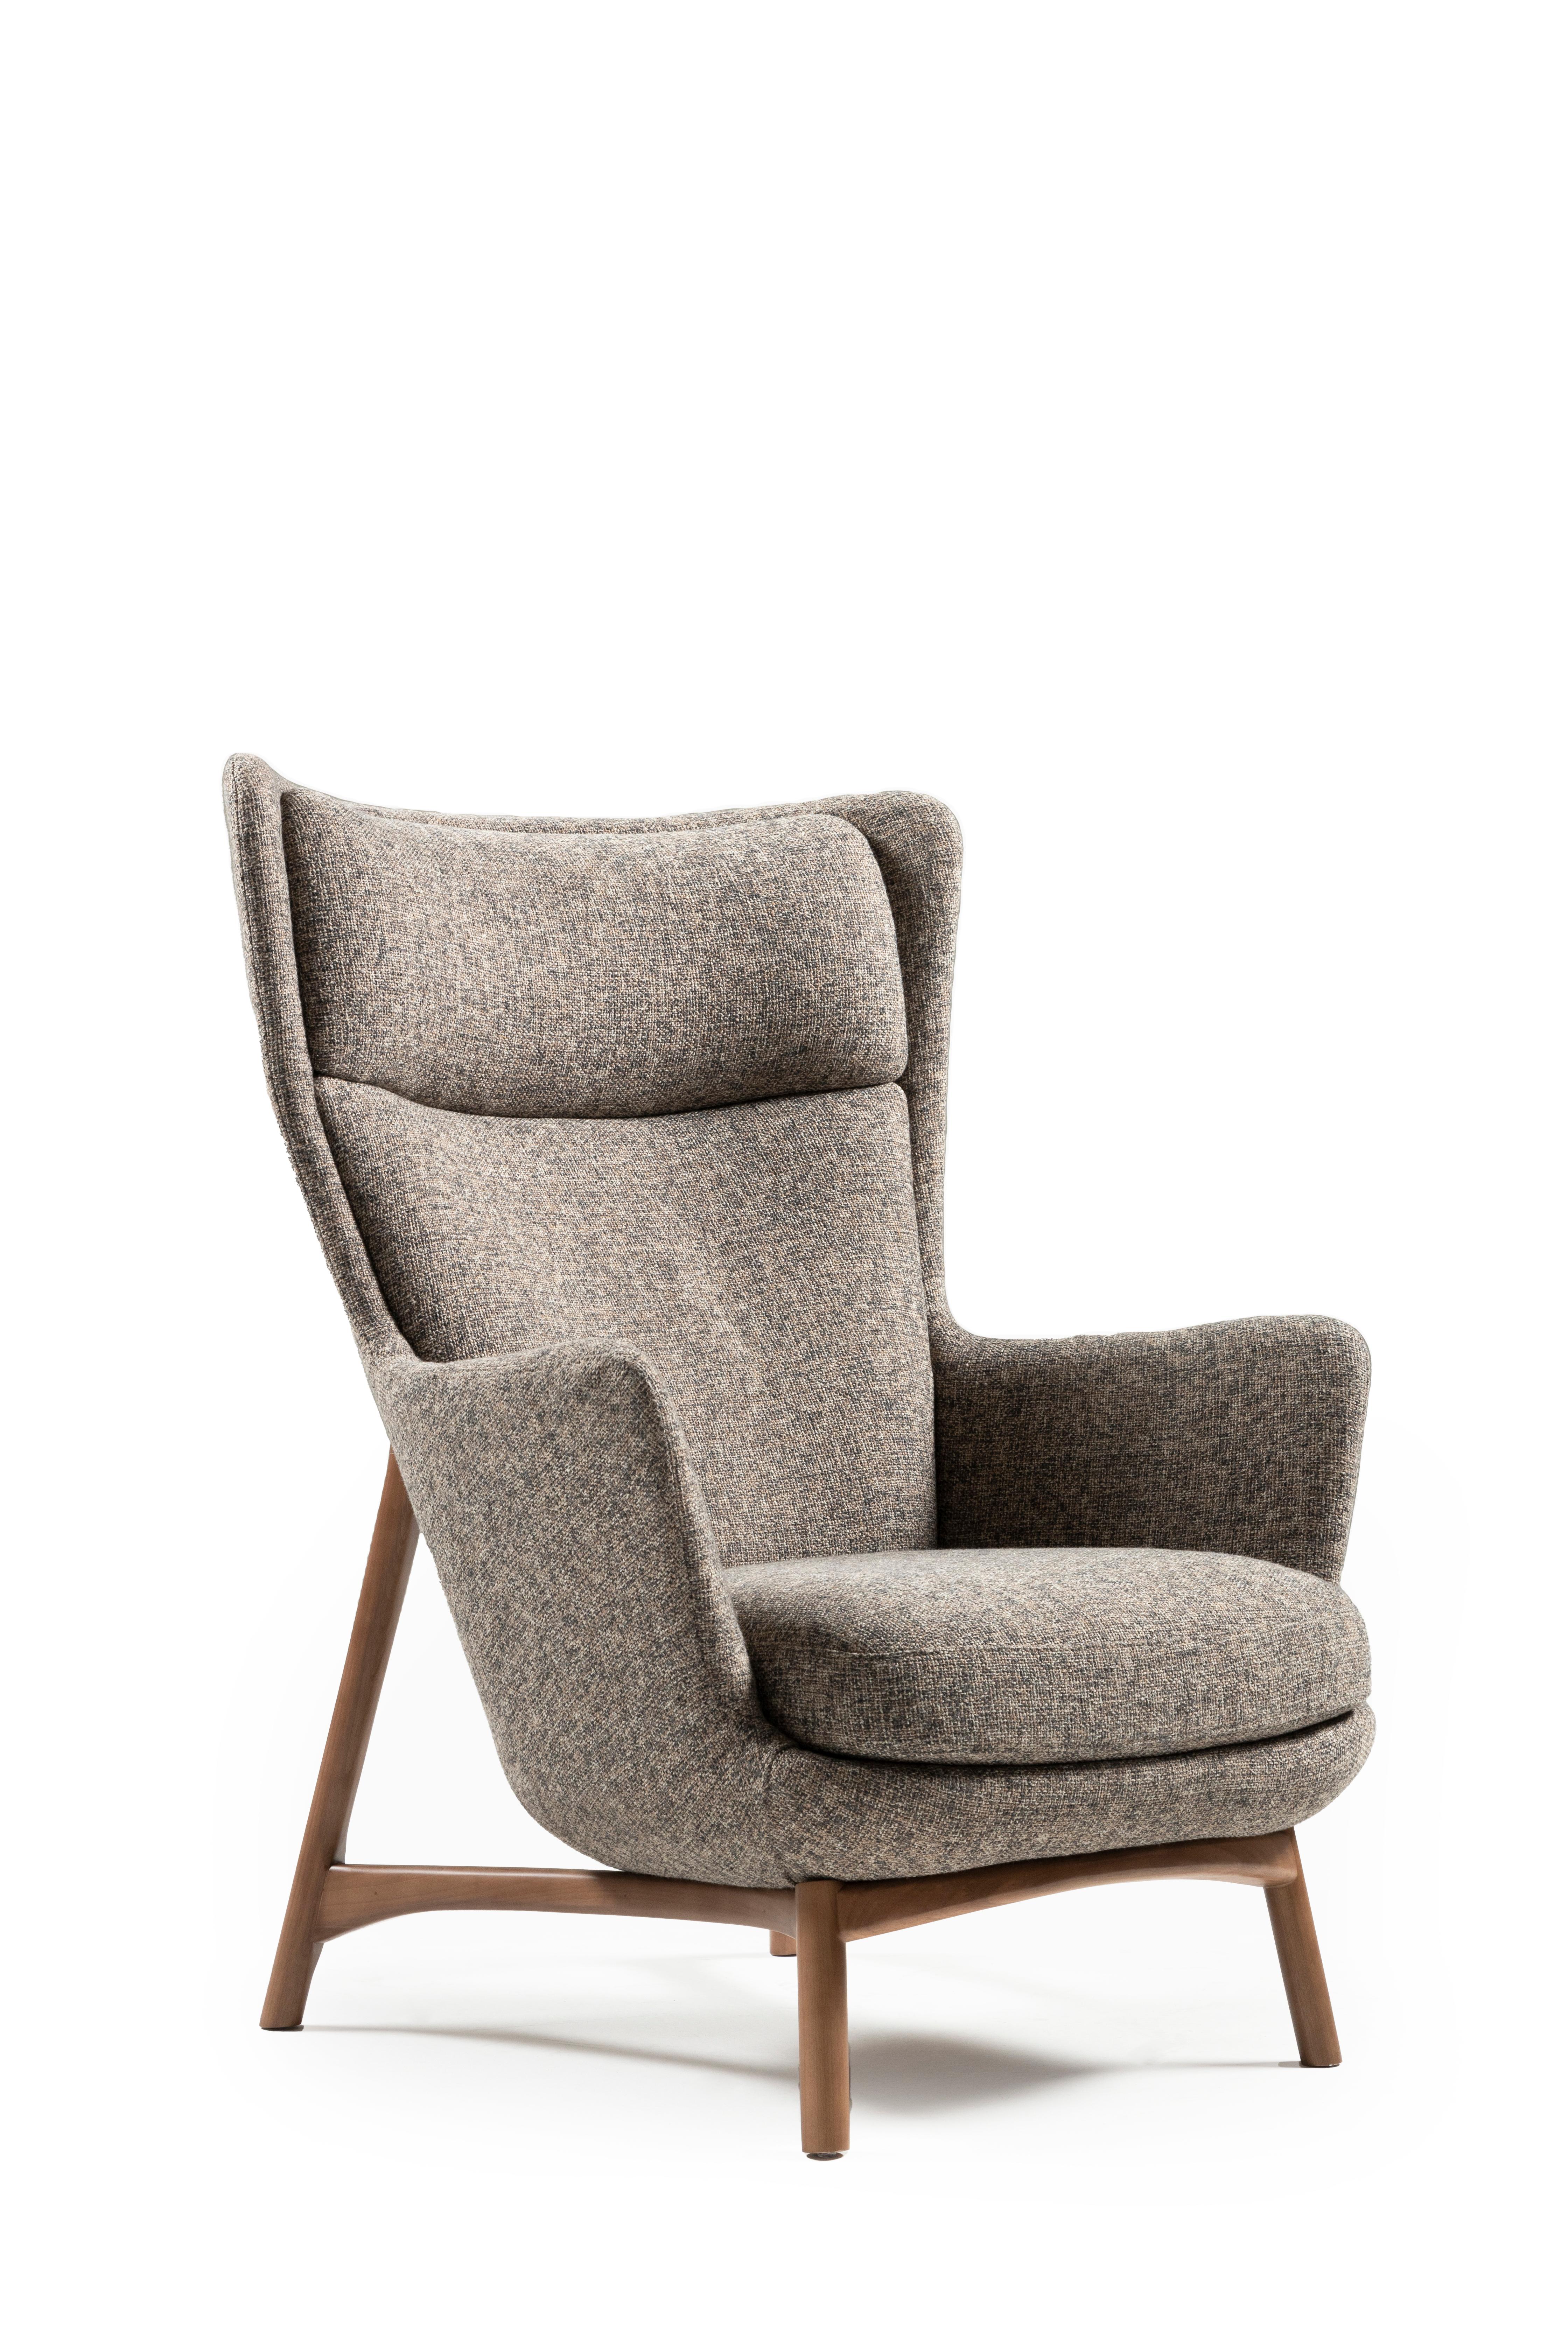 Sublime Sessel, Contemporary Style in Massivholz, Textilien Polsterung.  im Angebot 2